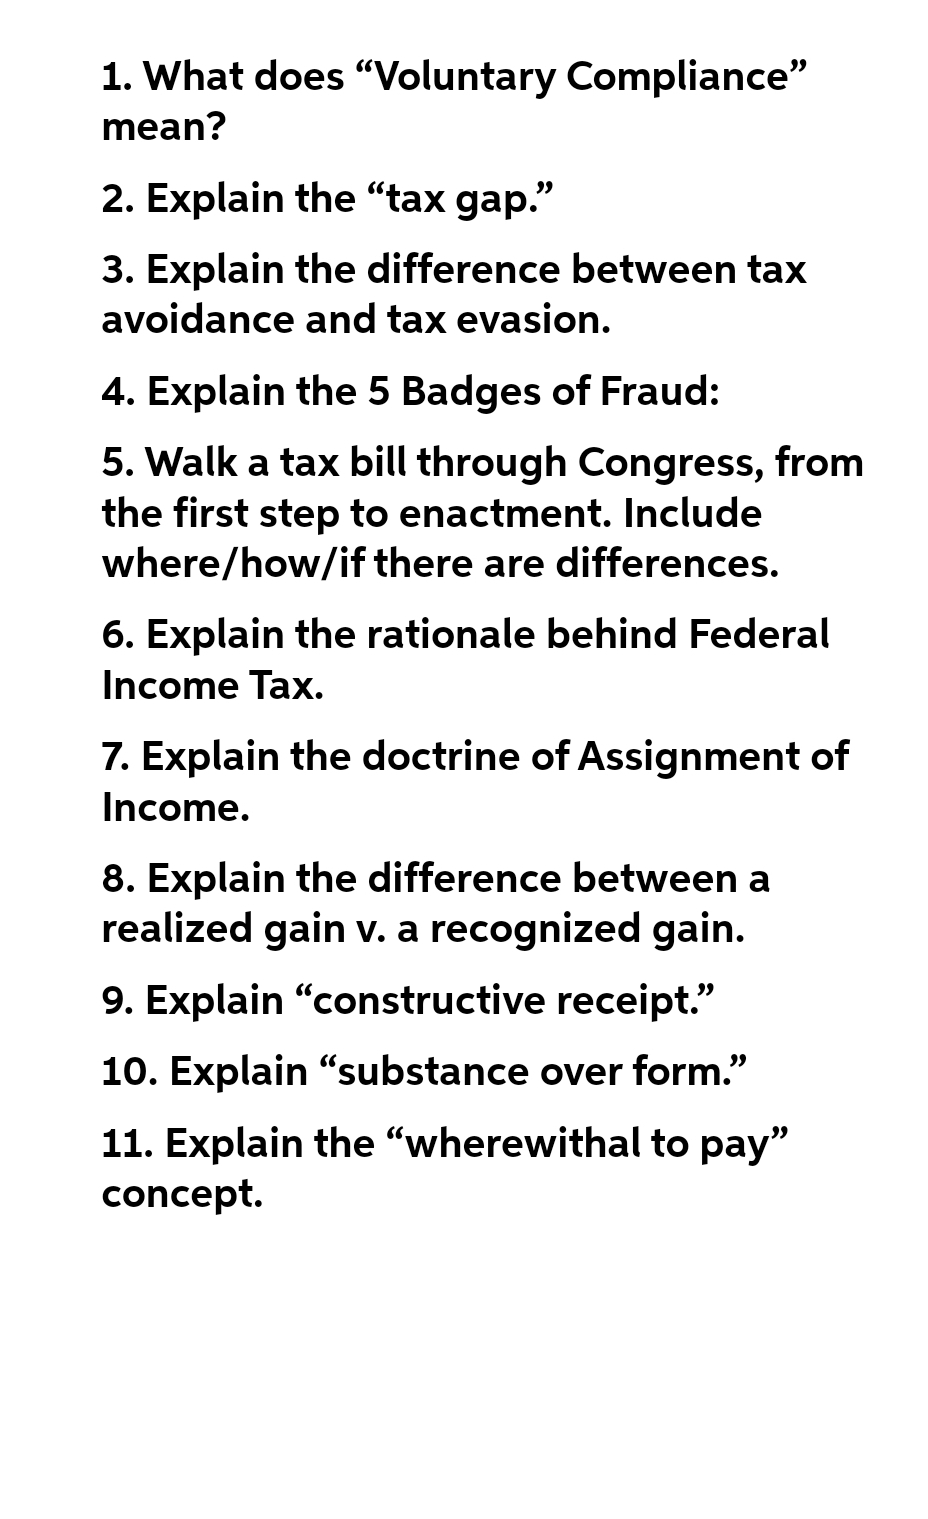 1. What does "Voluntary Compliance"
mean?
2. Explain the "tax gap."
3. Explain the difference between tax
avoidance and tax evasion.
4. Explain the 5 Badges of Fraud:
5. Walk a tax bill through Congress, from
the first step to enactment. Include
where/how/if there are differences.
6. Explain the rationale behind Federal
Income Tax.
7. Explain the doctrine of Assignment of
Income.
8. Explain the difference between a
realized gain v. a recognized gain.
9. Explain "constructive receipt."
10. Explain "substance over form."
11. Explain the "wherewithal to pay"
concept.